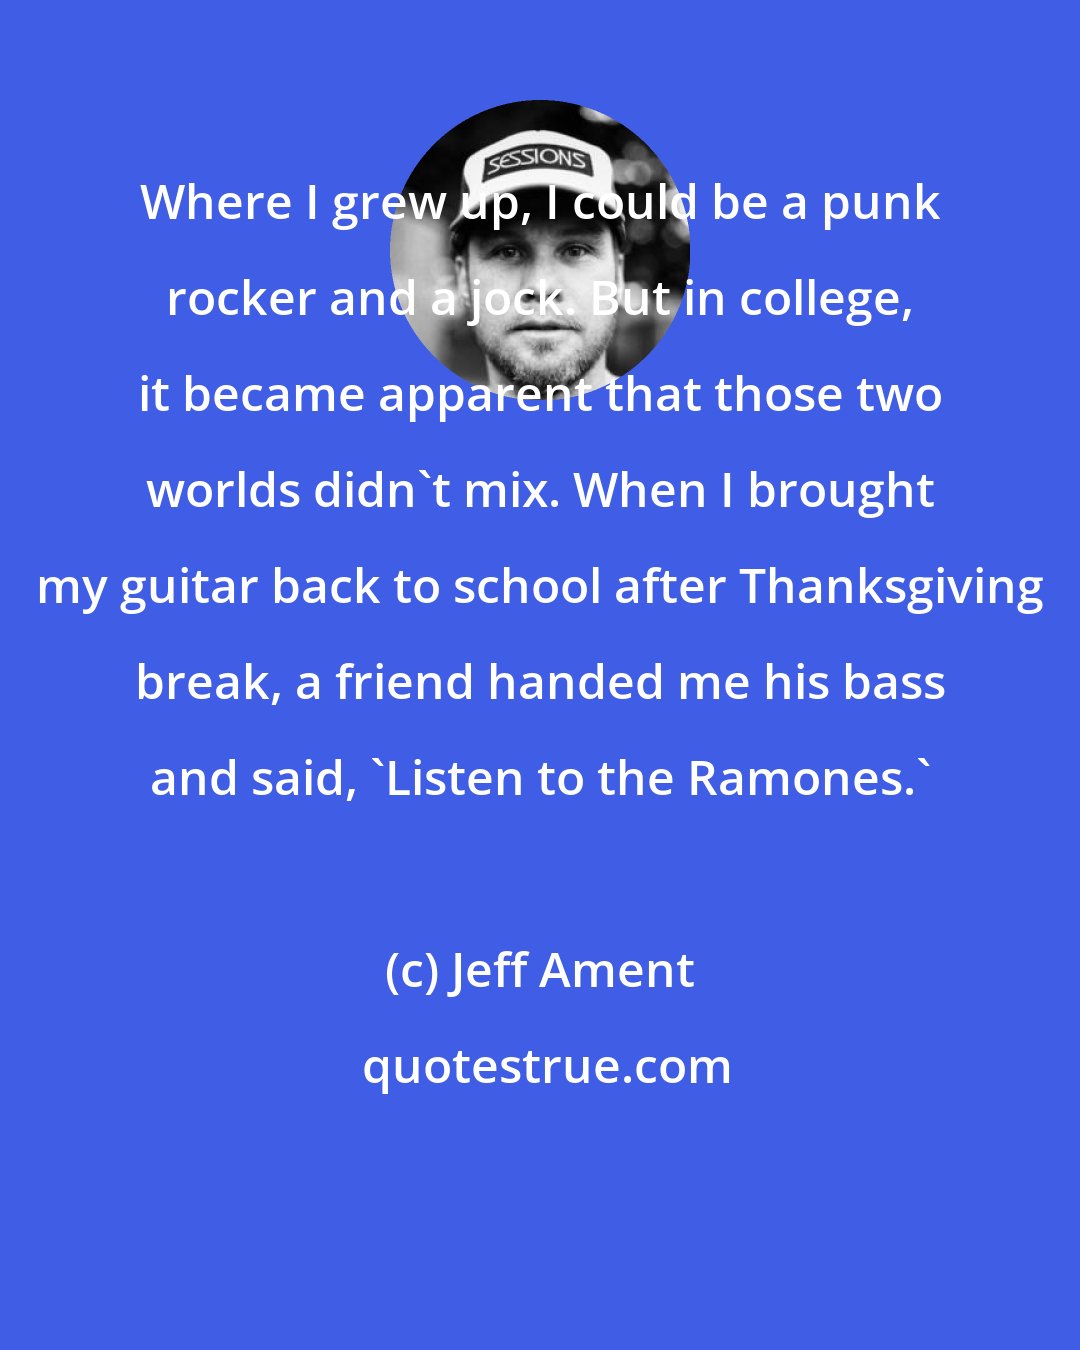 Jeff Ament: Where I grew up, I could be a punk rocker and a jock. But in college, it became apparent that those two worlds didn't mix. When I brought my guitar back to school after Thanksgiving break, a friend handed me his bass and said, 'Listen to the Ramones.'